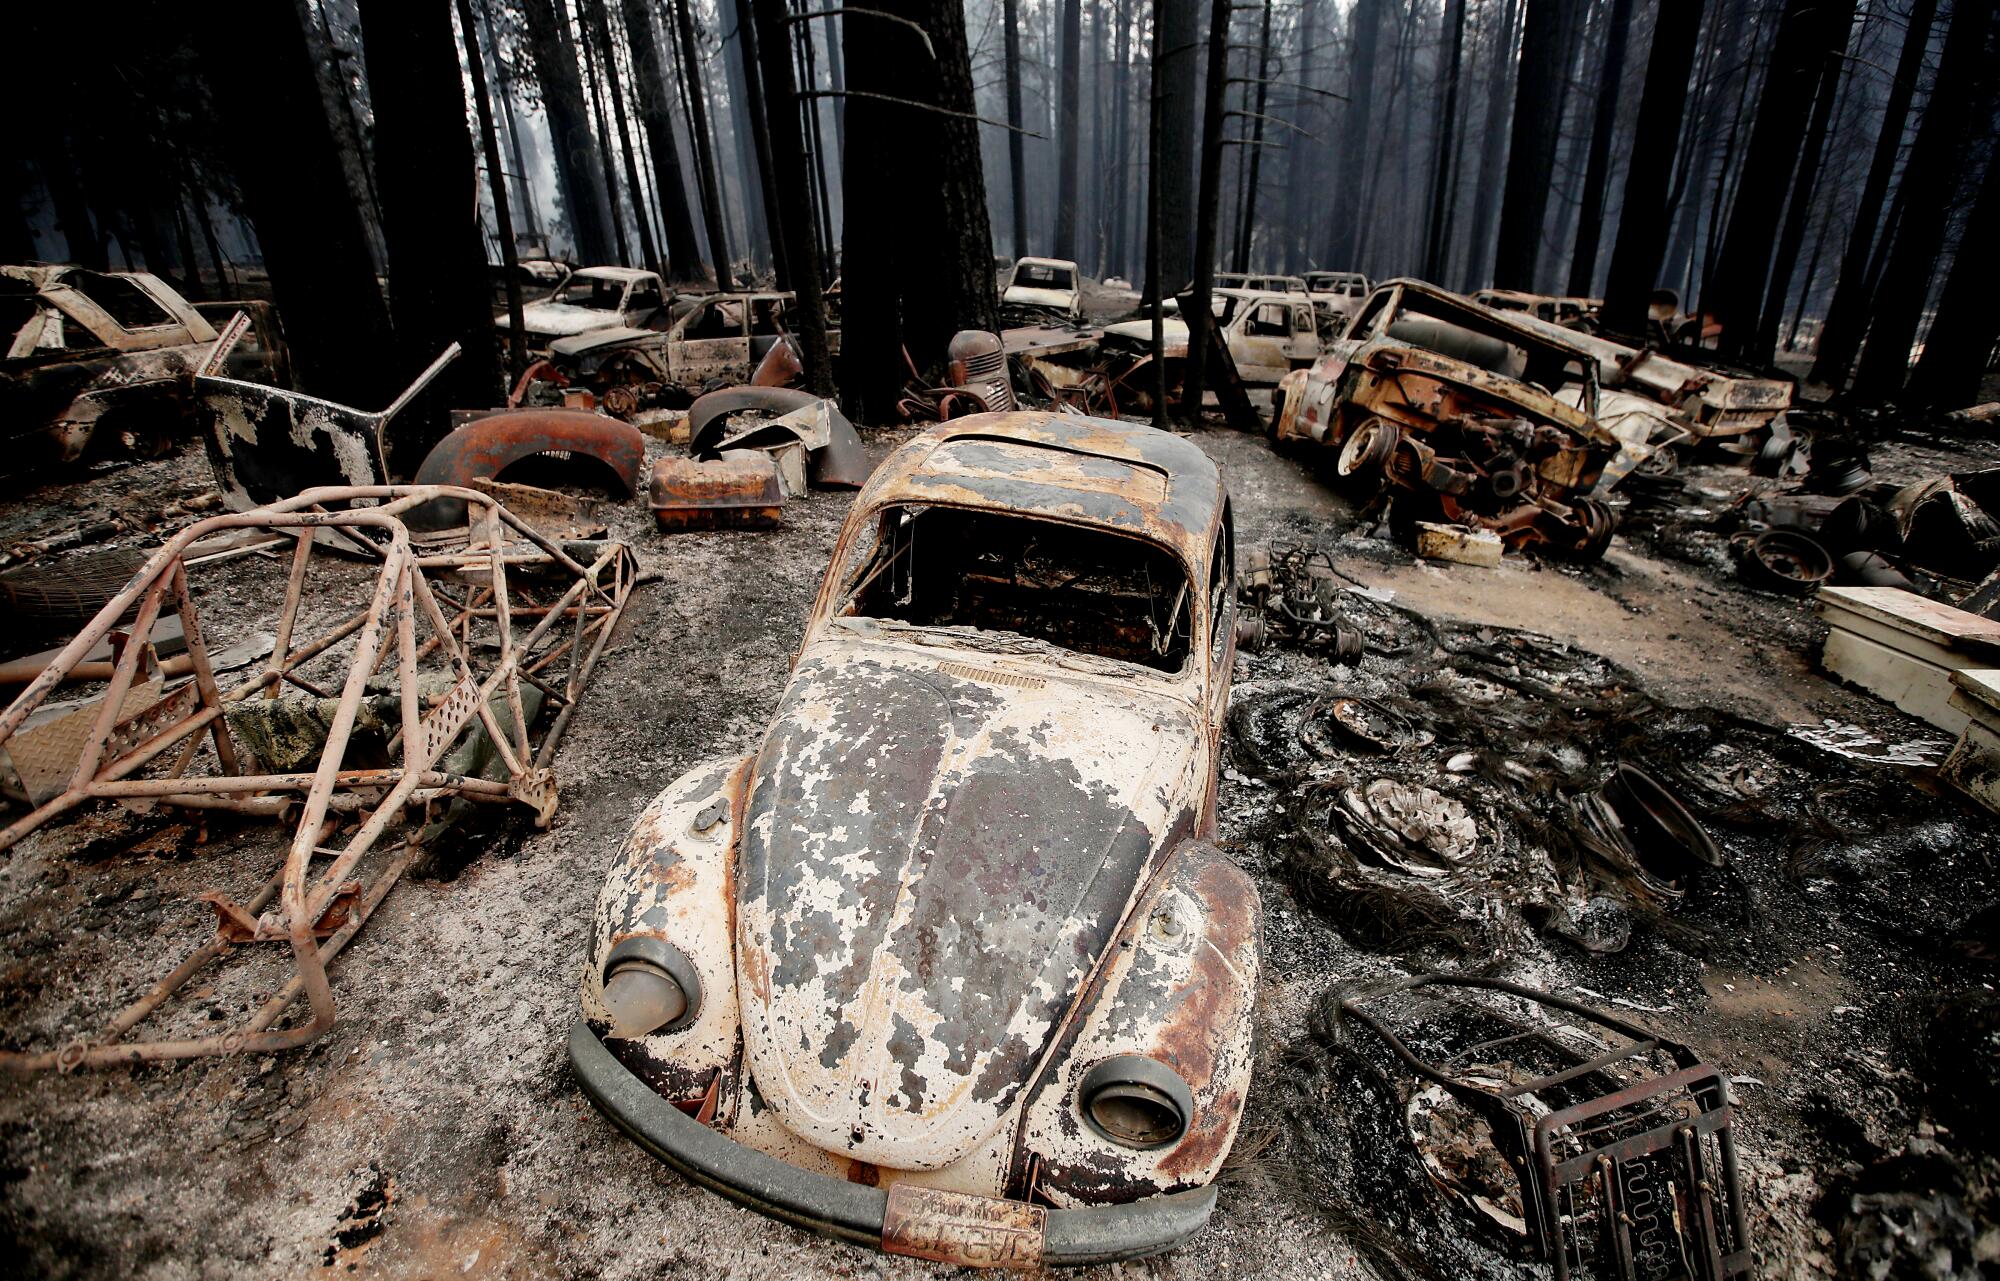 Aug. 18: A fire leaves burnt vehicles and debris among trees